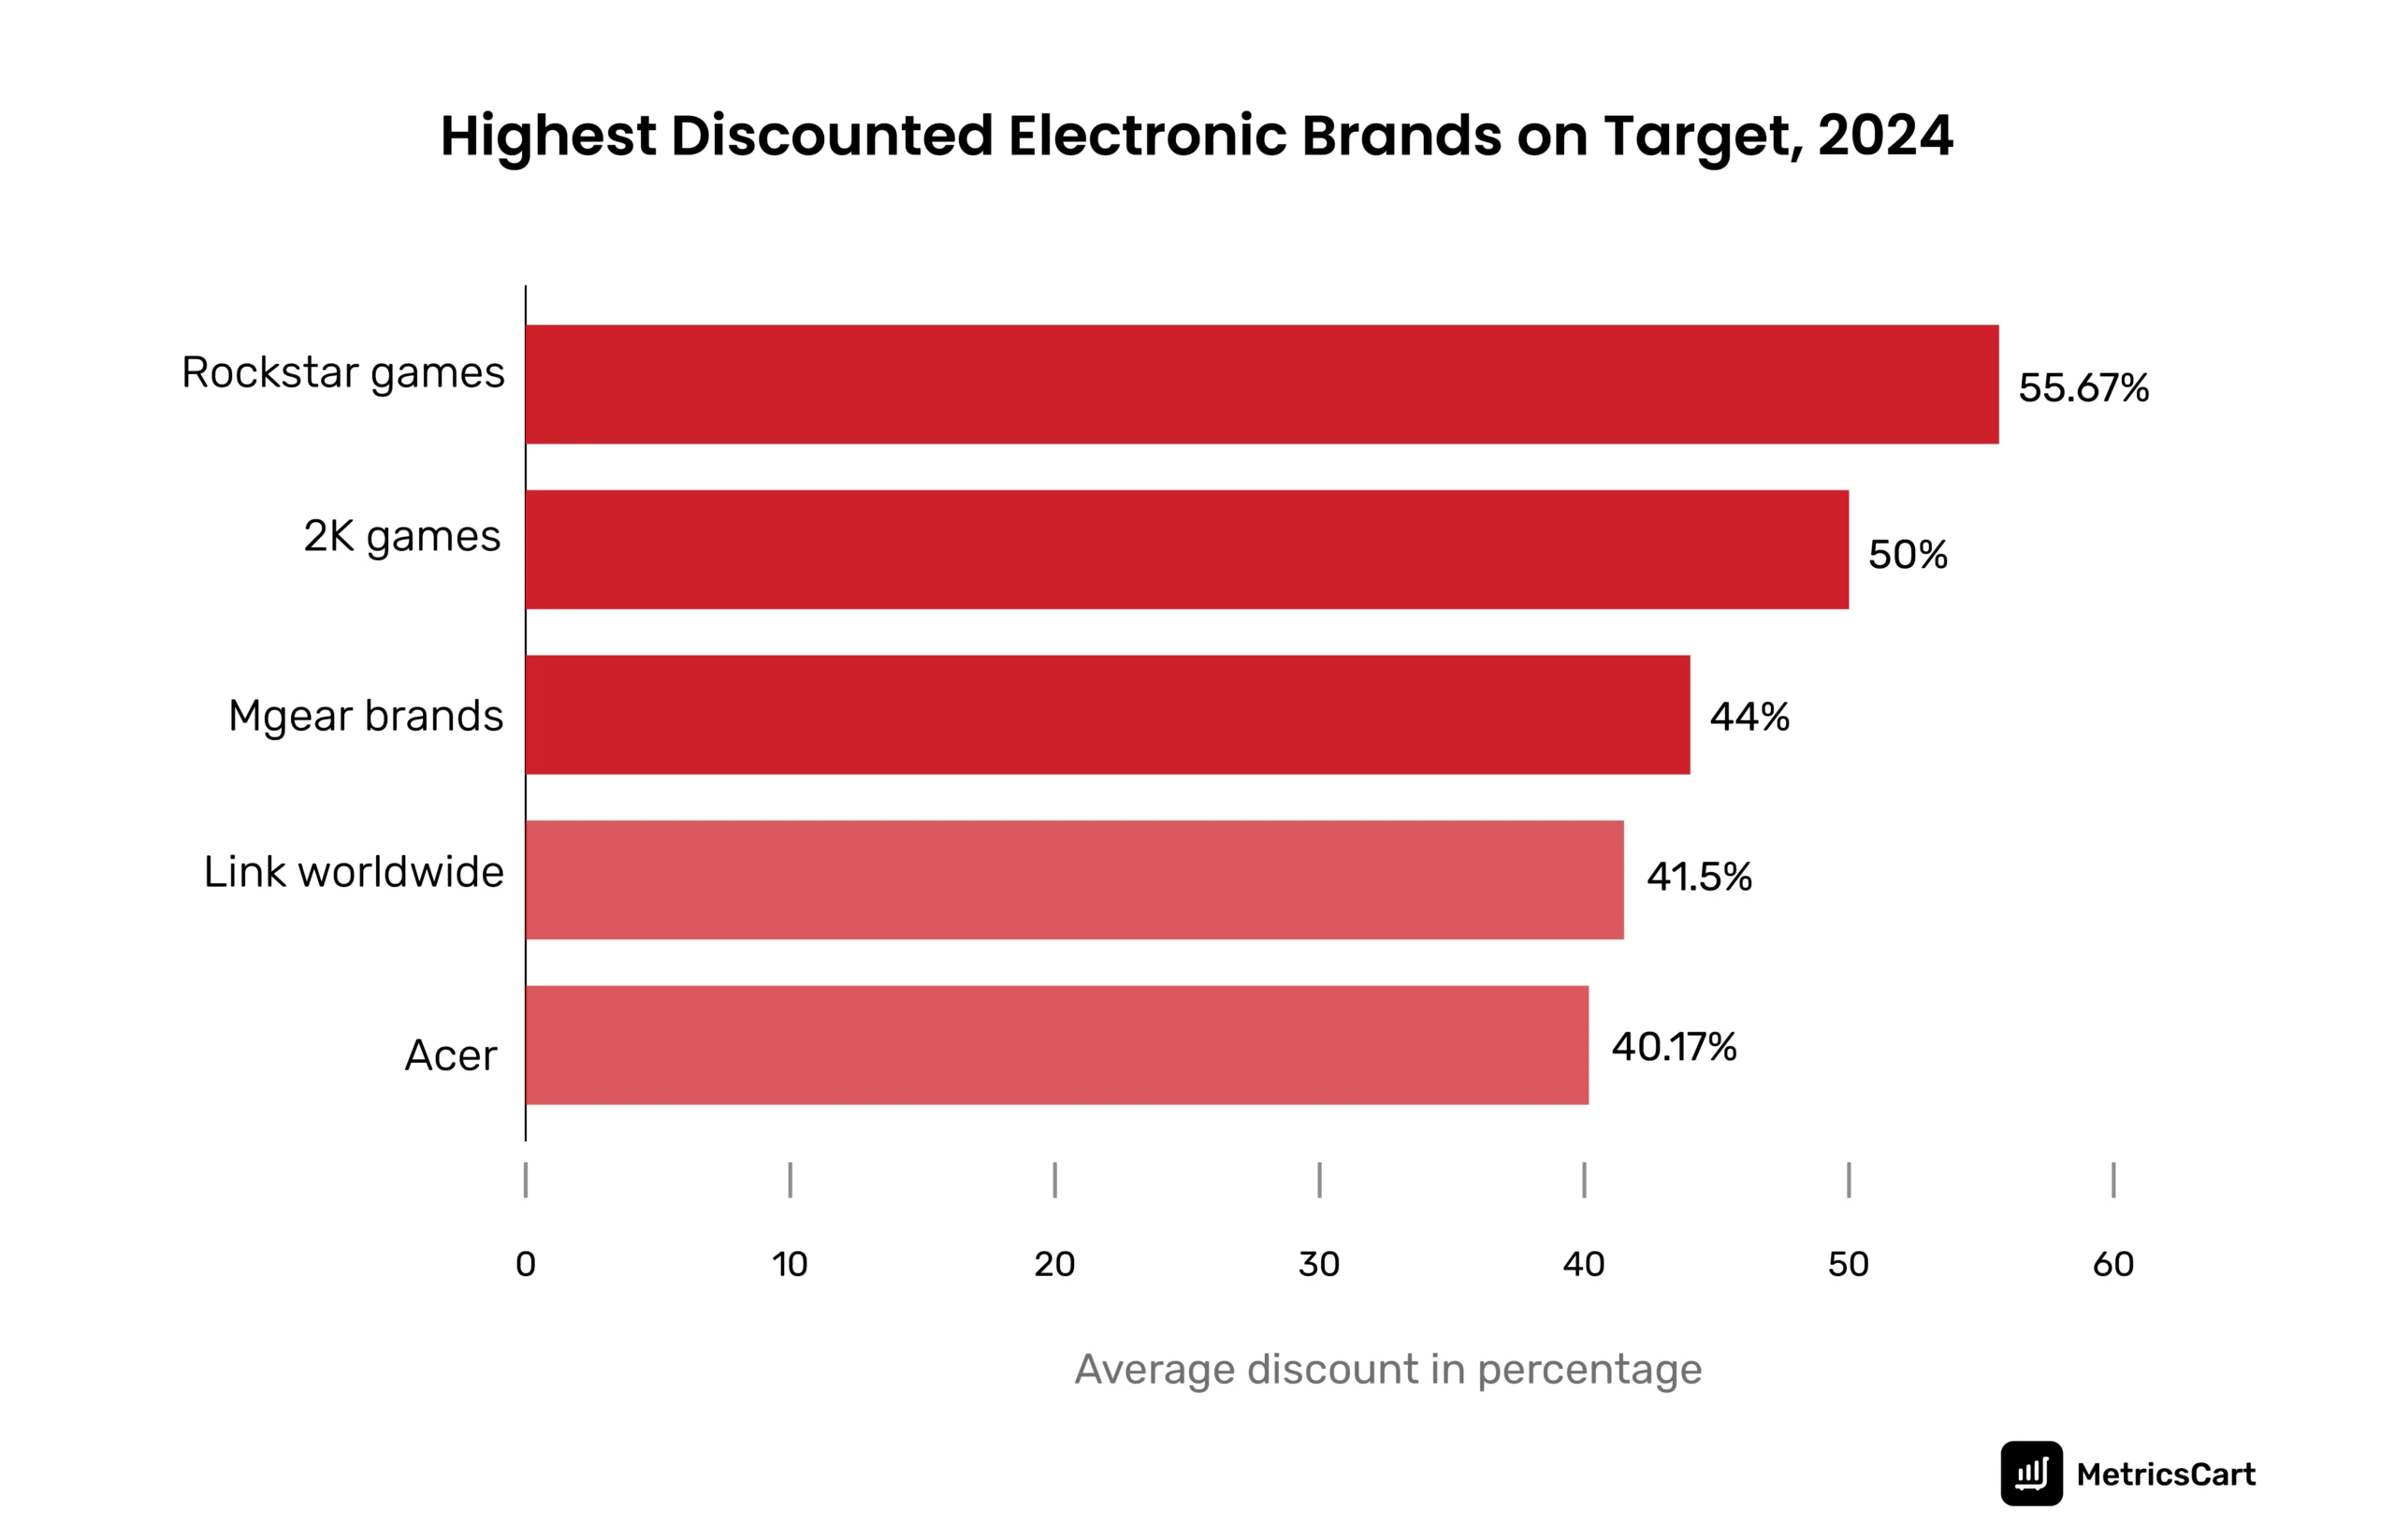 The graph shows the electronic brands offering the best deals on Target in 2024